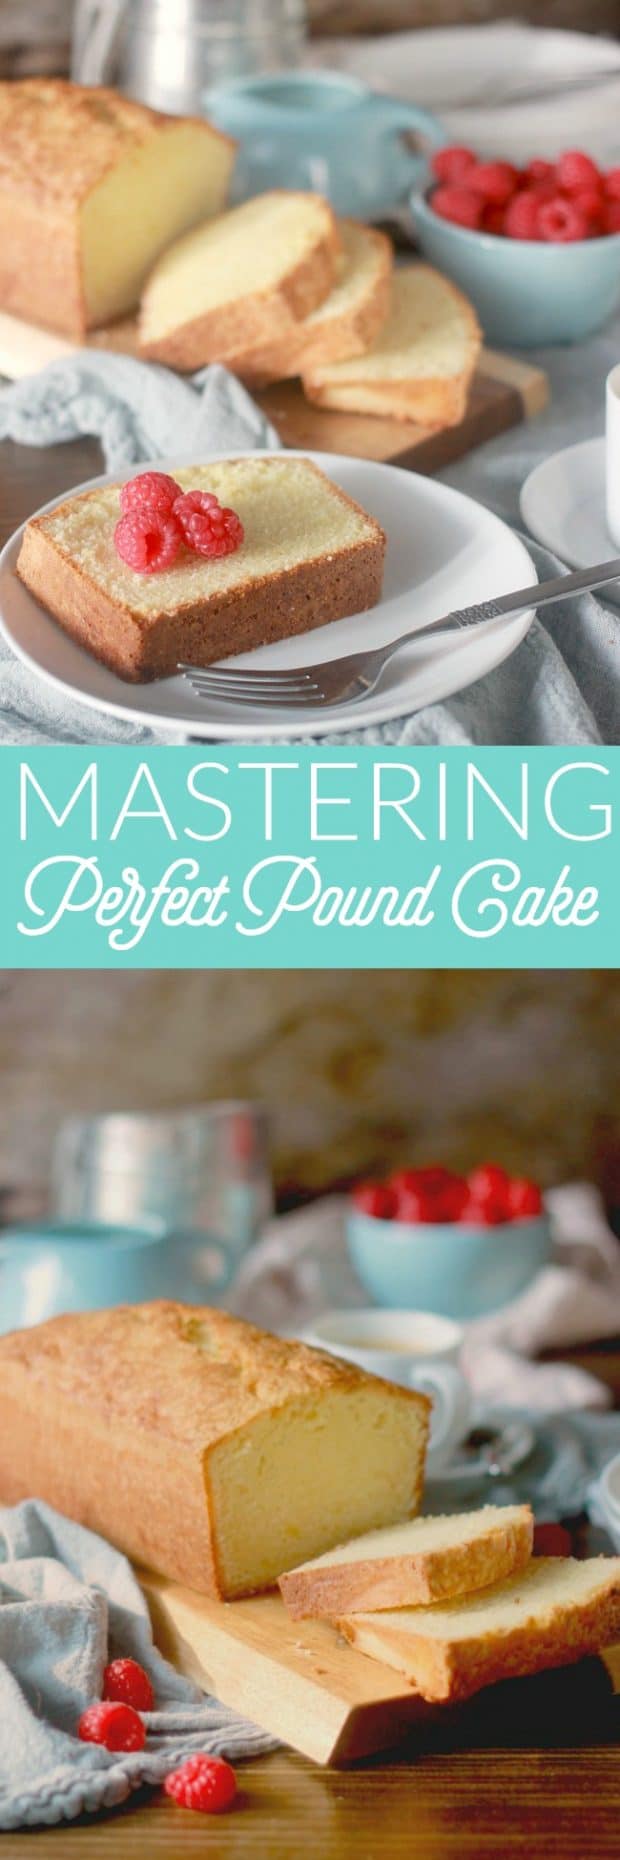 Creating the perfect pound cake requires just a little attention to detail! This classic pound cake is buttery, rich, and moist. The simple flavor of butter and vanilla is an excellent canvas to pair with fresh berries or use this as an excellent base recipe for creating endless other flavors. 